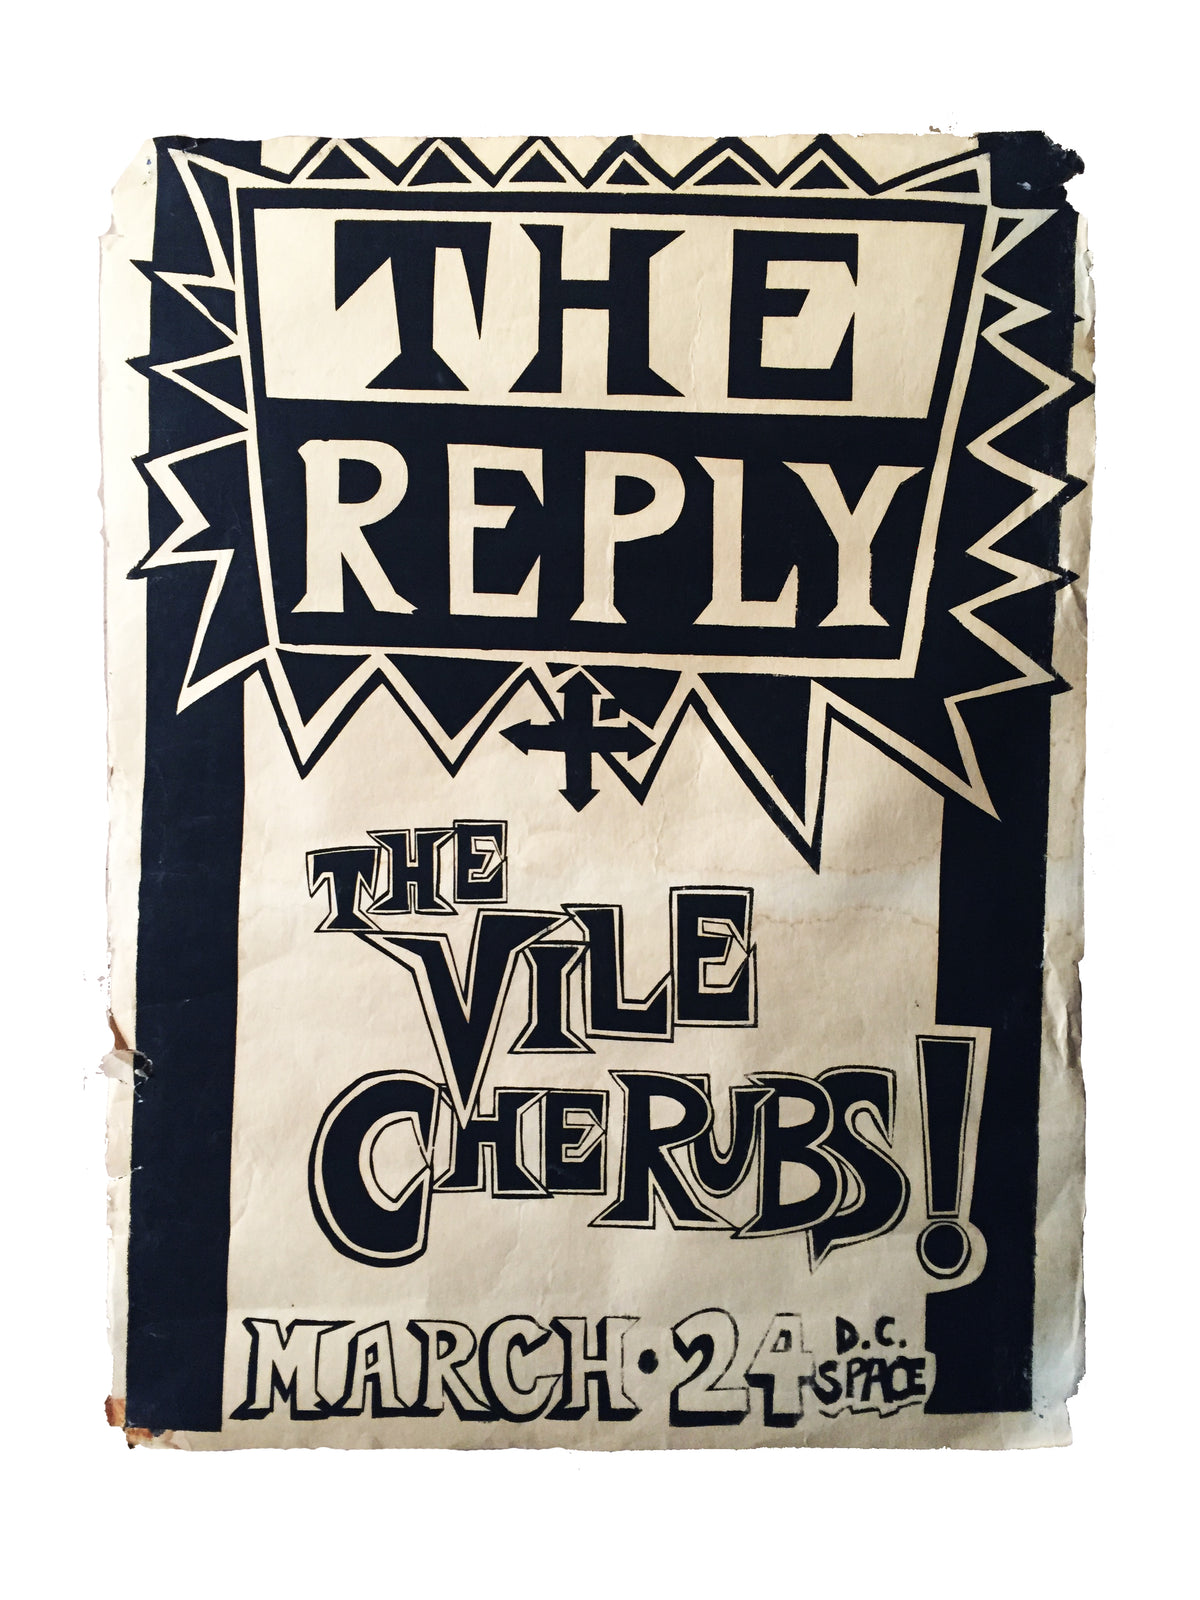 Vintage The Reply And Vile Cherubs &quot;Show&quot; Screen Printed Poster